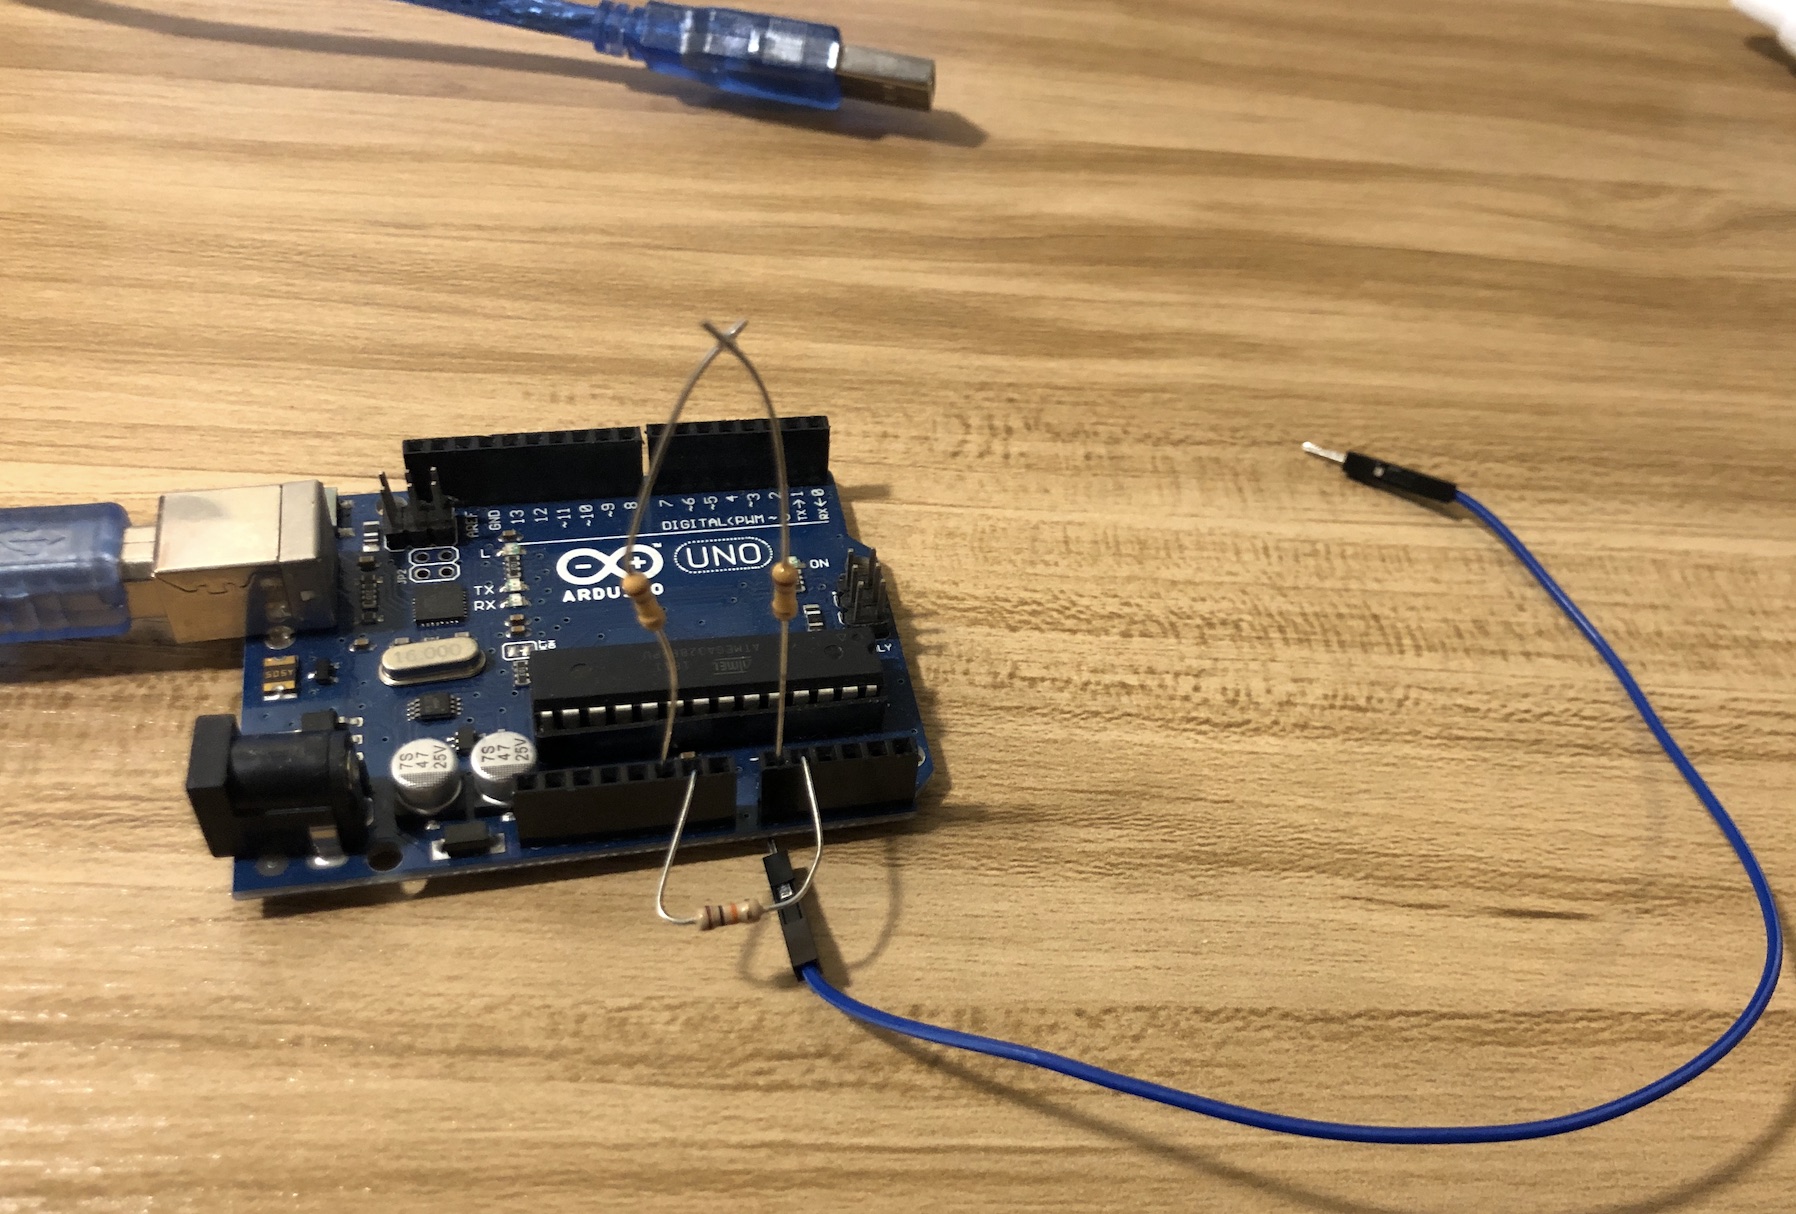 Arduino with jumper wire on analog pin, which is connected to the ground by resistor